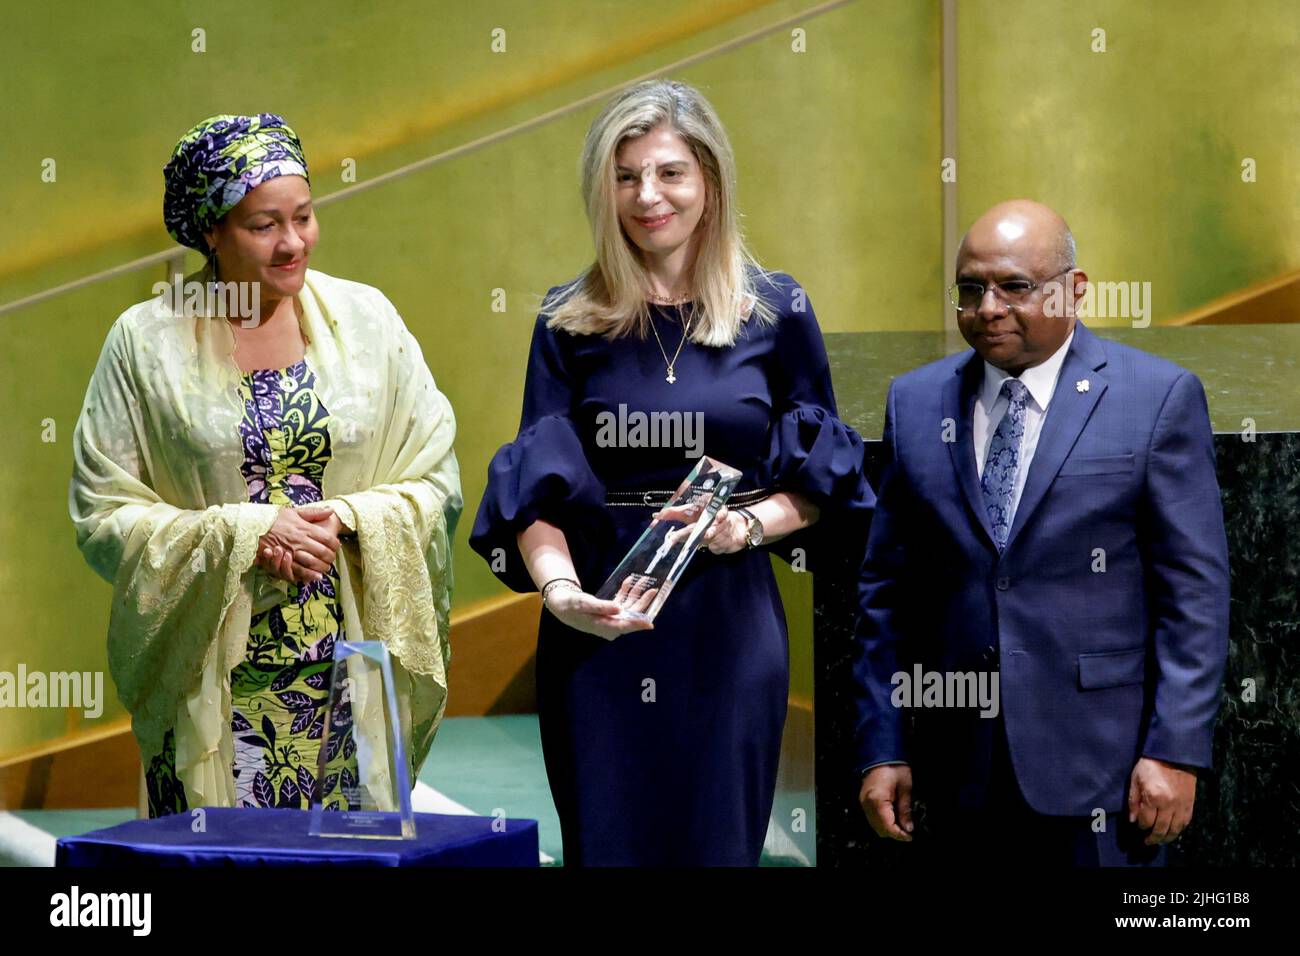 Marianna Vardinogiannis receives the 2020 UN Nelson Mandela Prize, next to President of the United Nations General Assembly Abdulla Shahid at the celebration of Nelson Mandela International Day at United Nations Headquarters in New York, U.S., July 18, 2022. REUTERS/Eduardo Munoz Stock Photo